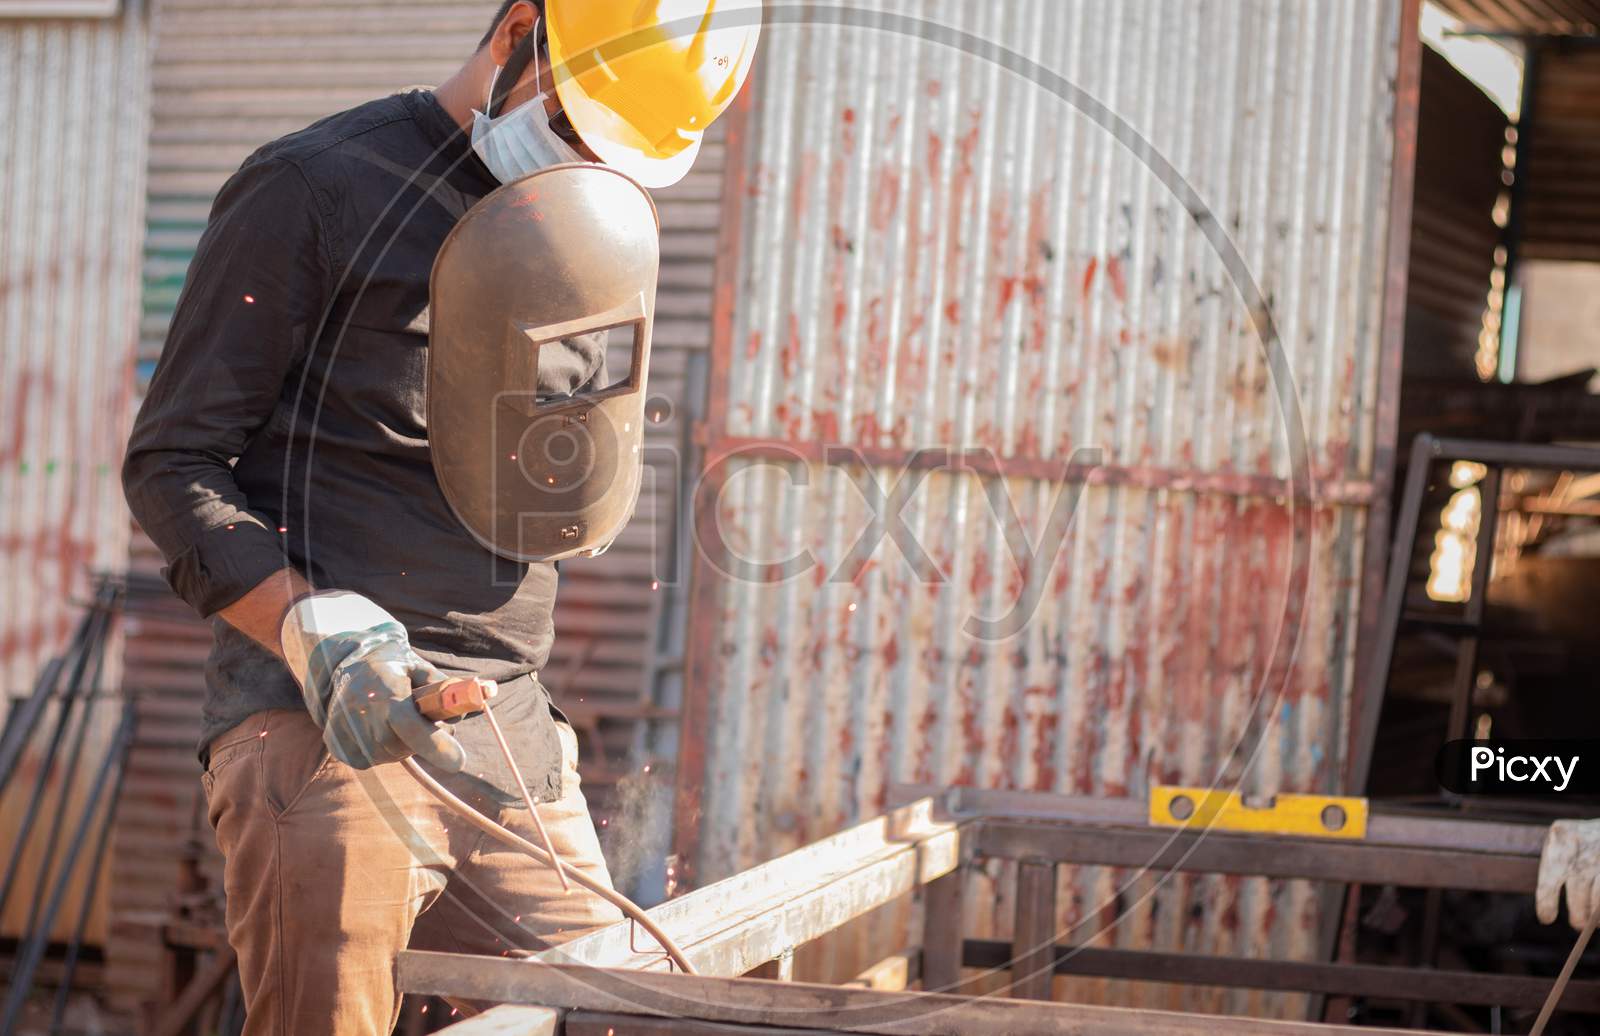 A Young Welder doing welding with a Helmet and Mask during Corona Virus Pandemic